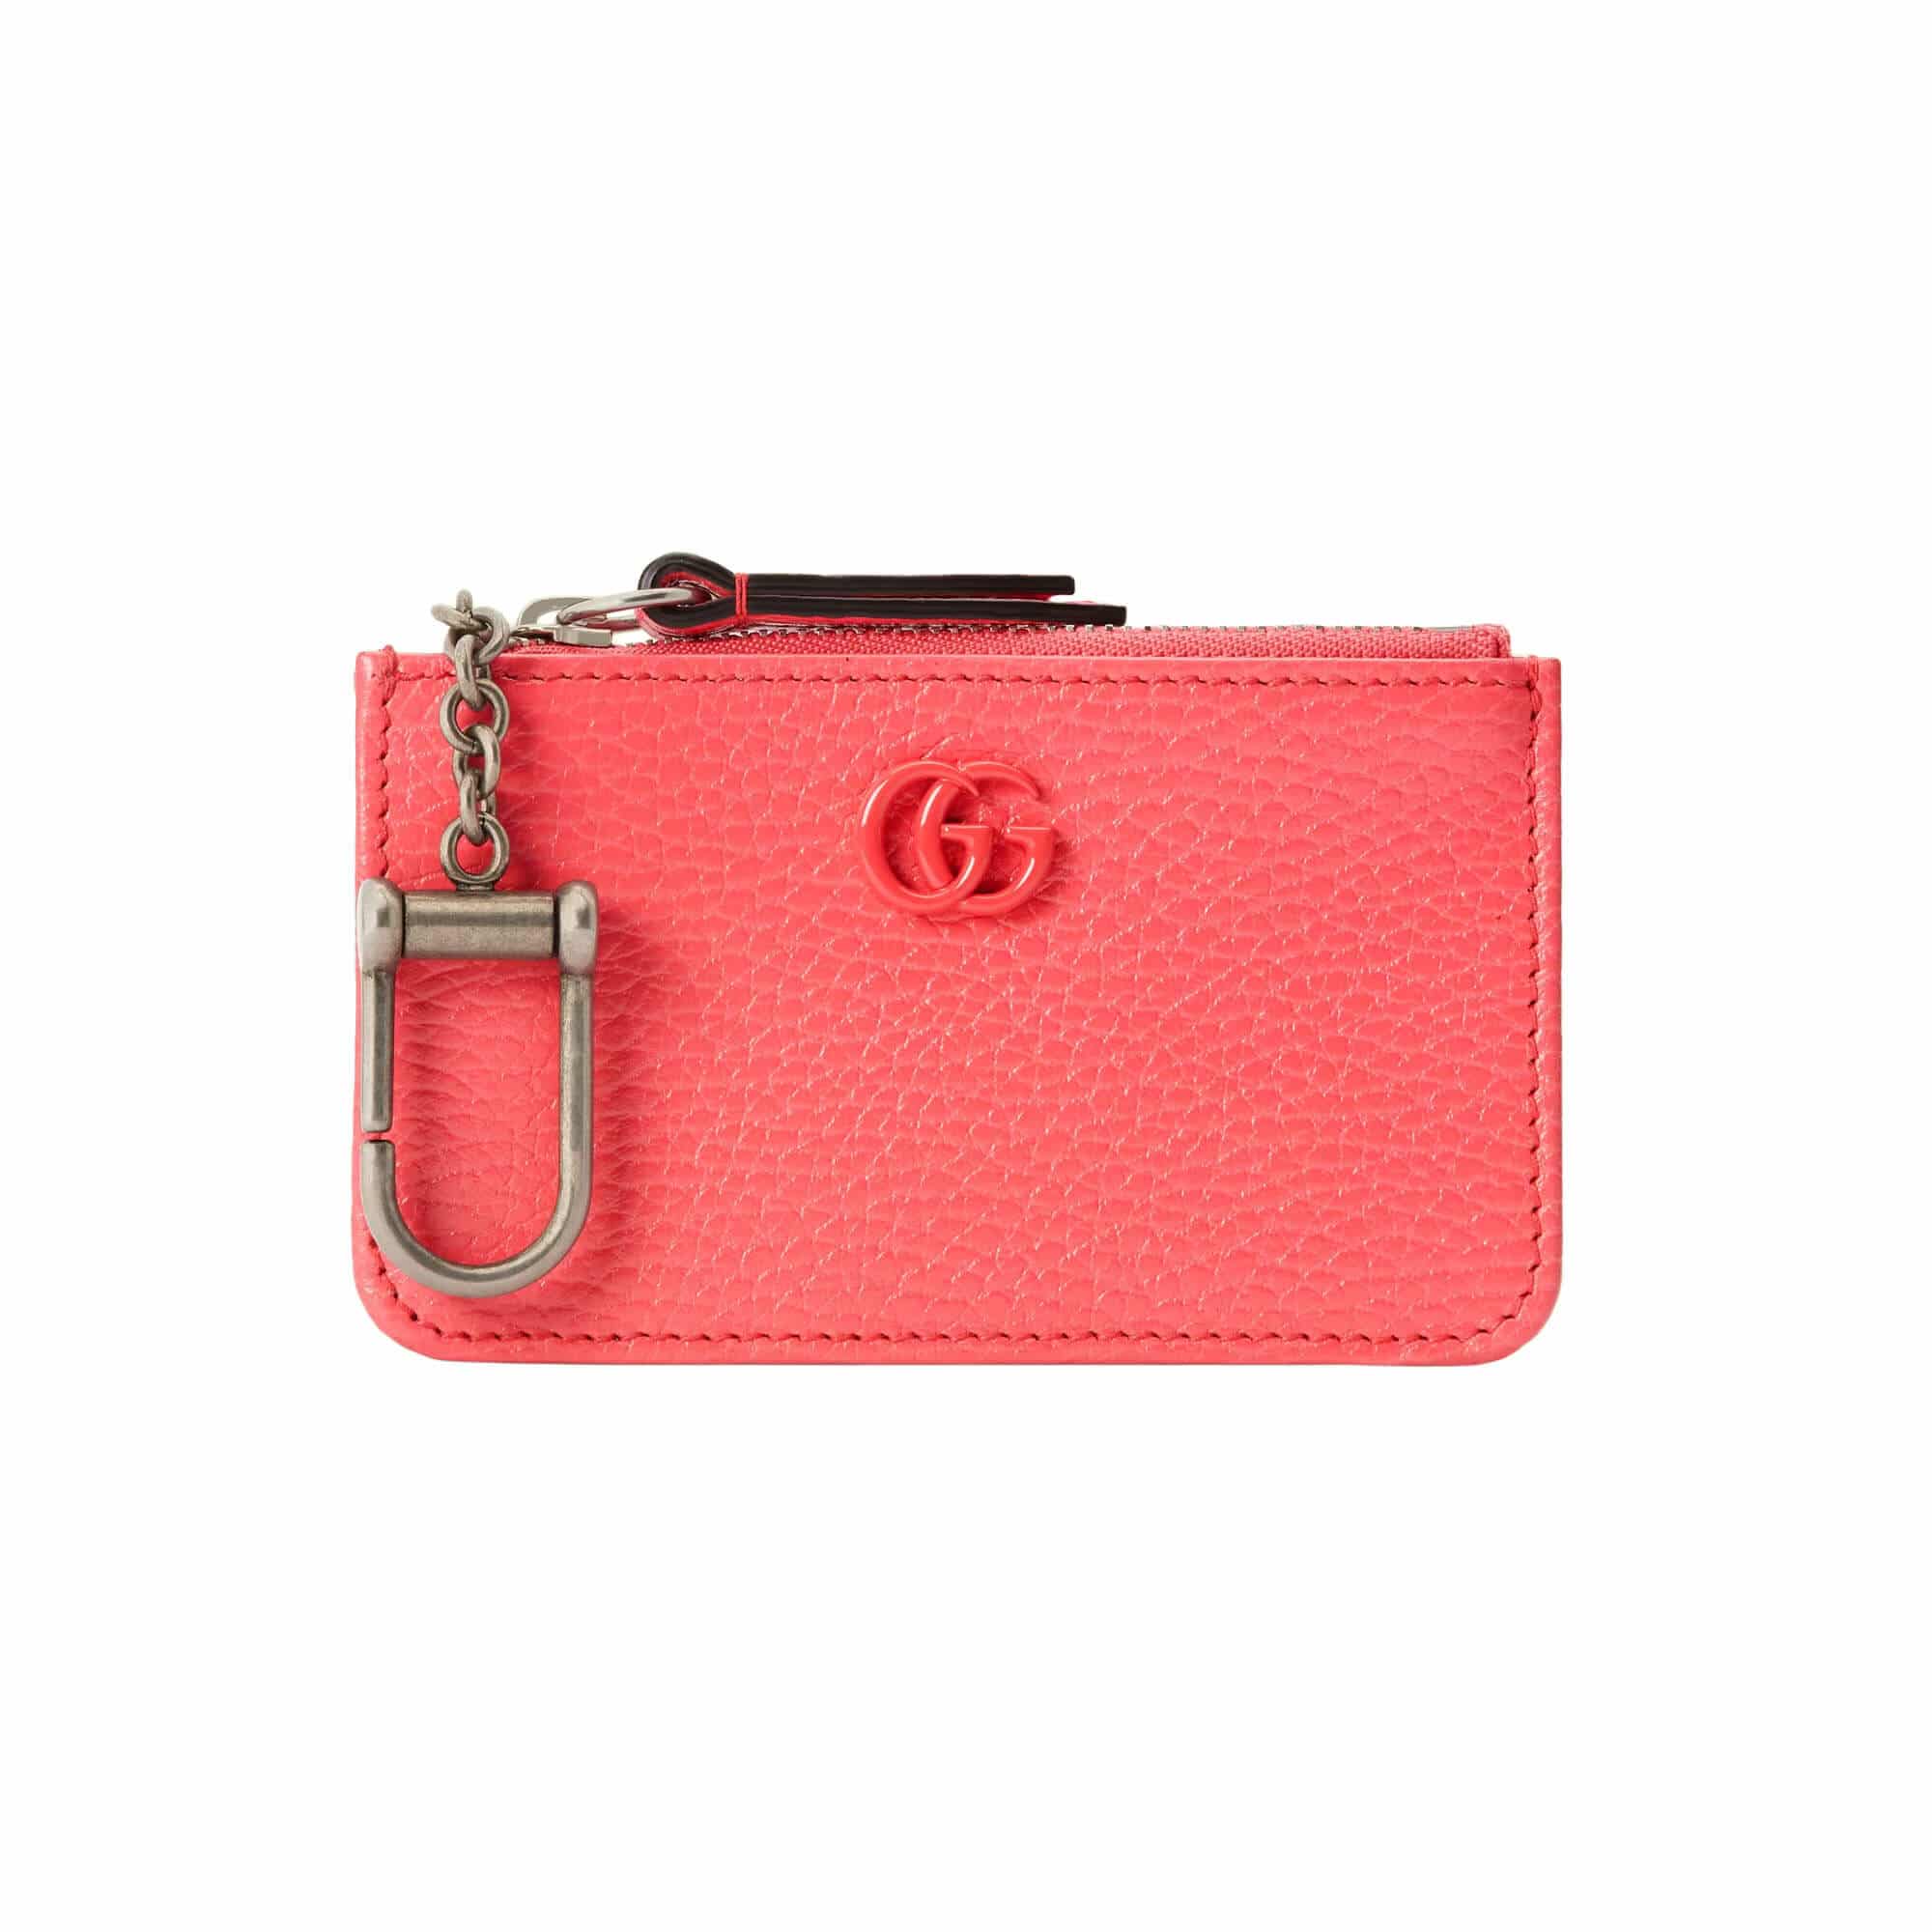 Gucci Gg Marmont Leather Key Holder - ShopStyle